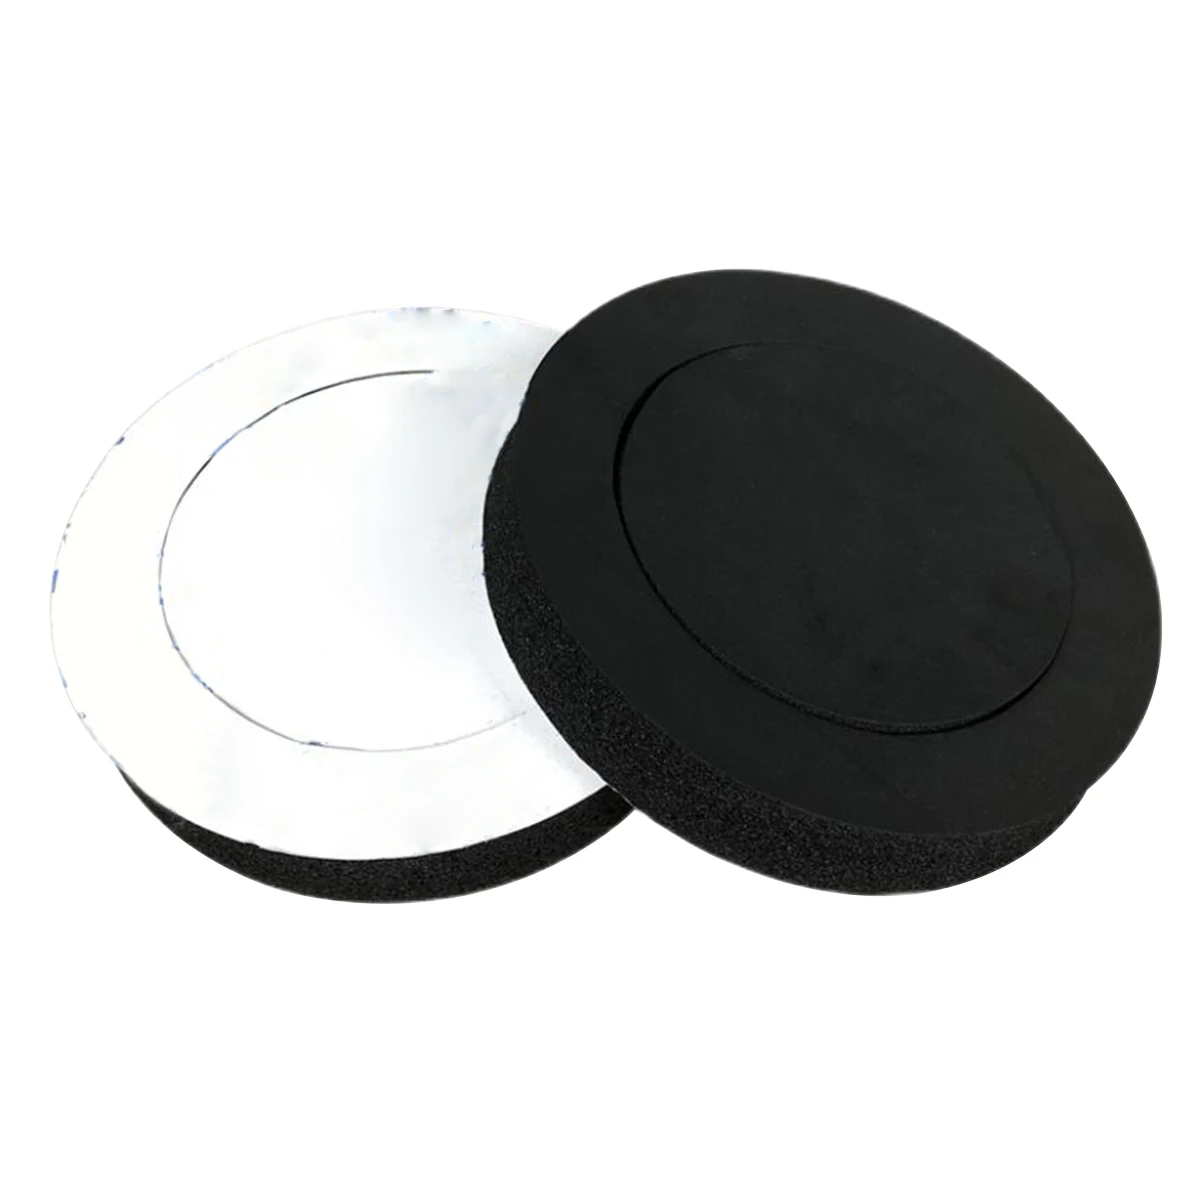 

Acoustic Horn Ring Bass Ring Universal Anti-noise Cushion Slow Rebound Seal Door Sound Insulation Horn Mat